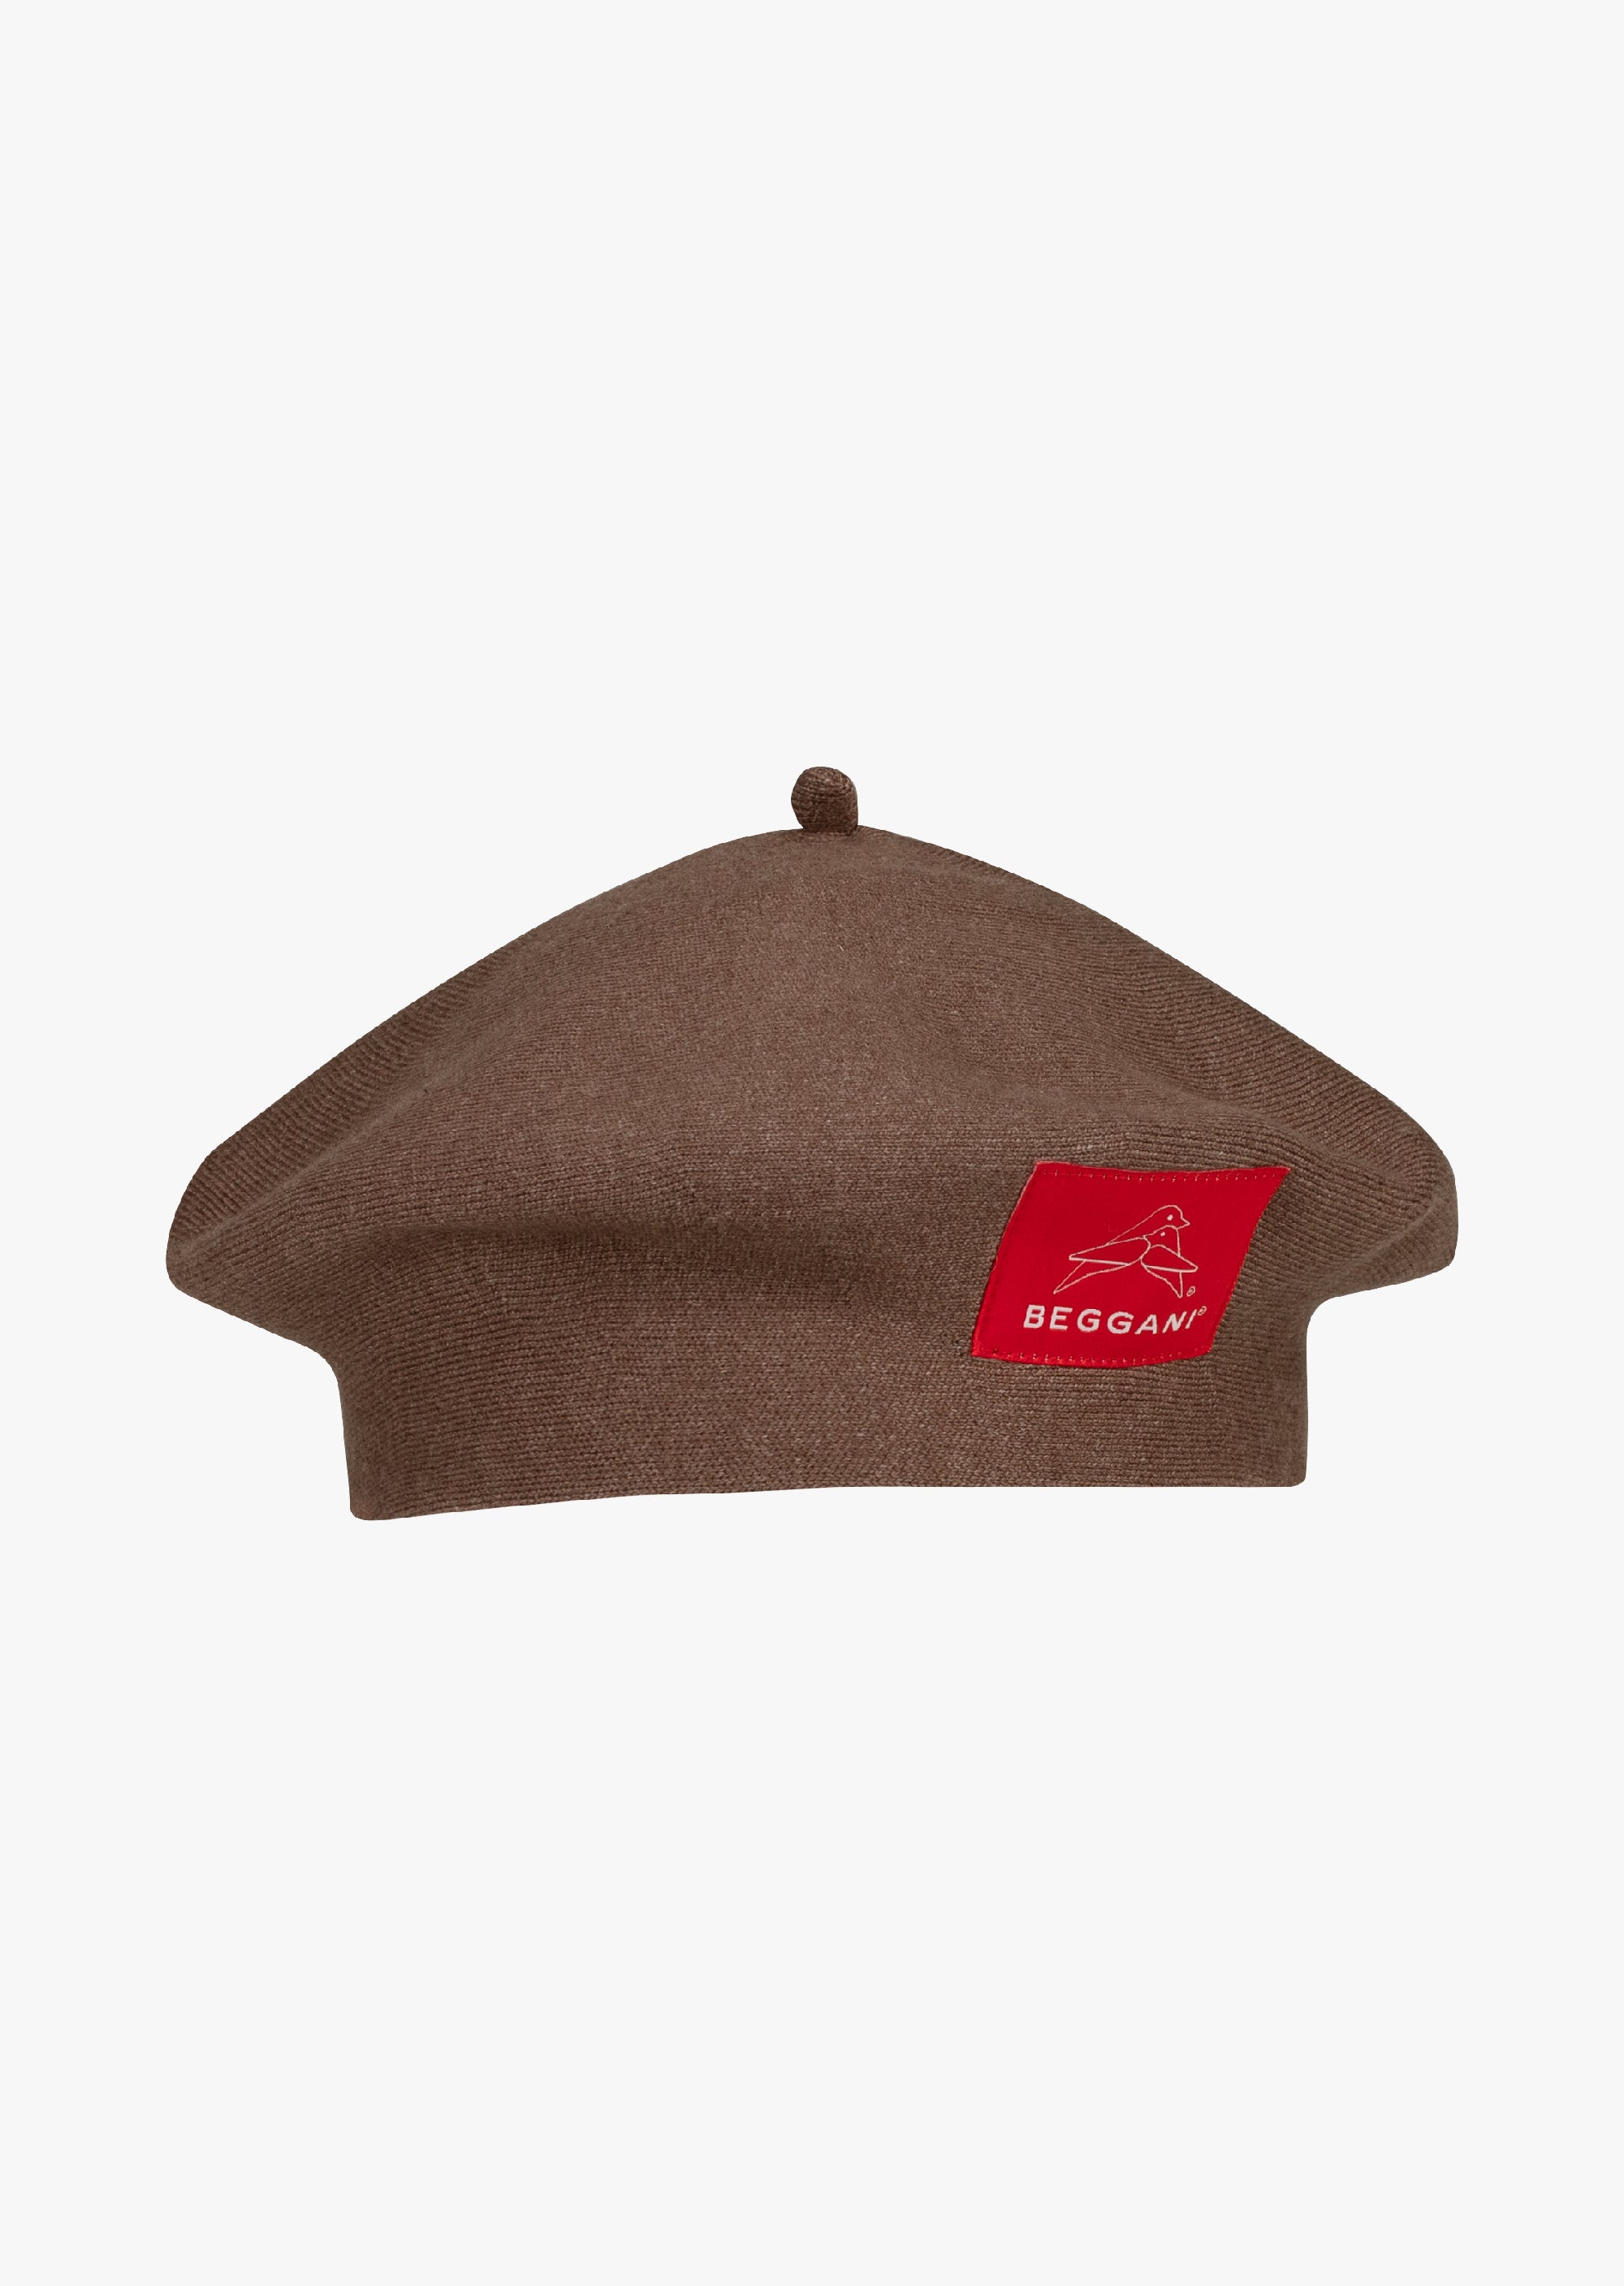 Beret made of soft cotton with logo BEGGANI